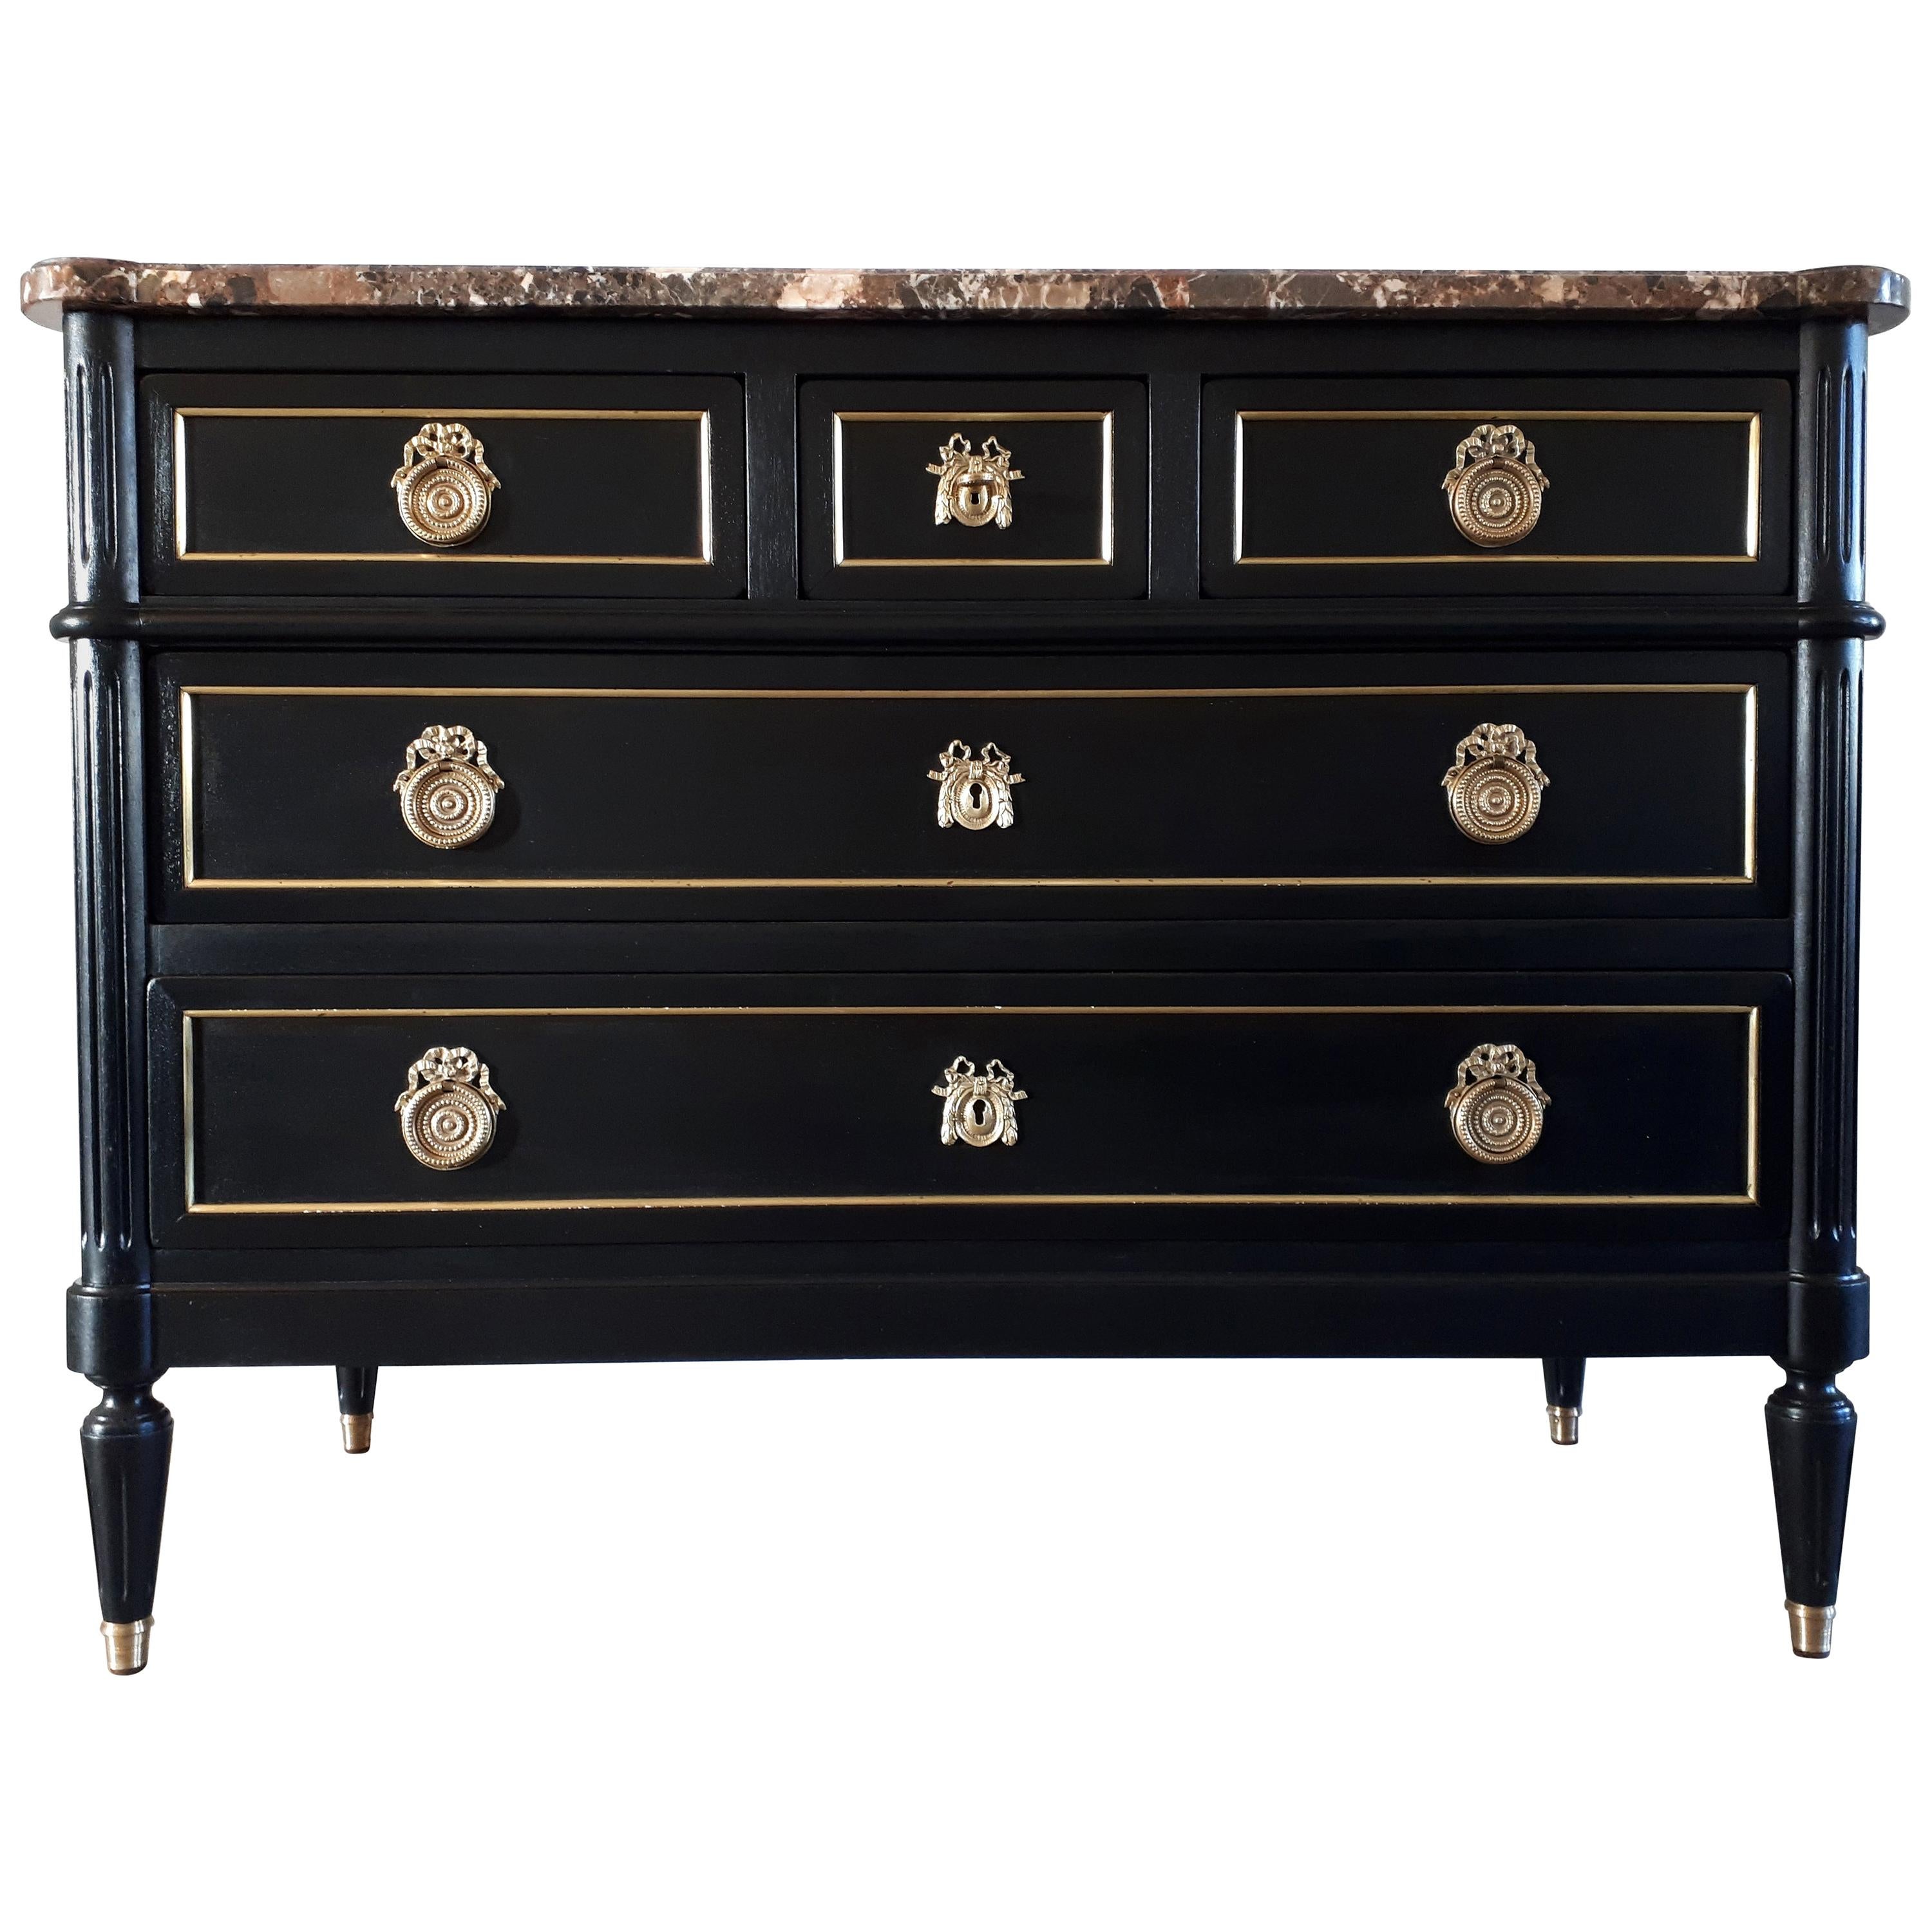 Antique French Louis XVI style chest of drawers topped with a rare and wonderful brown, grey, white and some copper touch marble, named Brèche Nouvelle and from France. Legs are fluted and finished with golden bronze clogs. Five dovetailed drawers